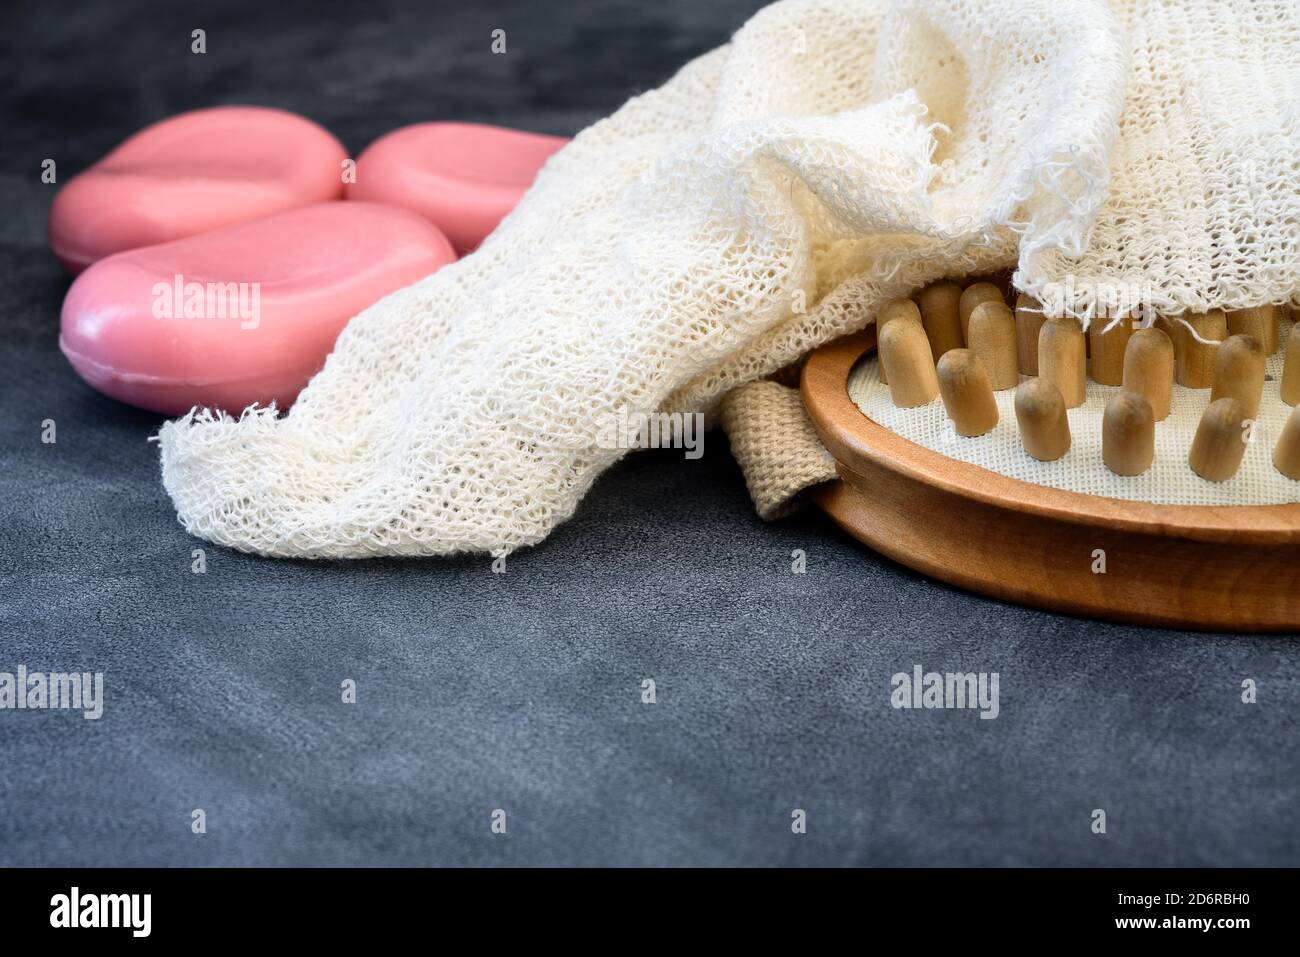 Toilet soap, brush and Terry cloth - bath accessories Stock Photo